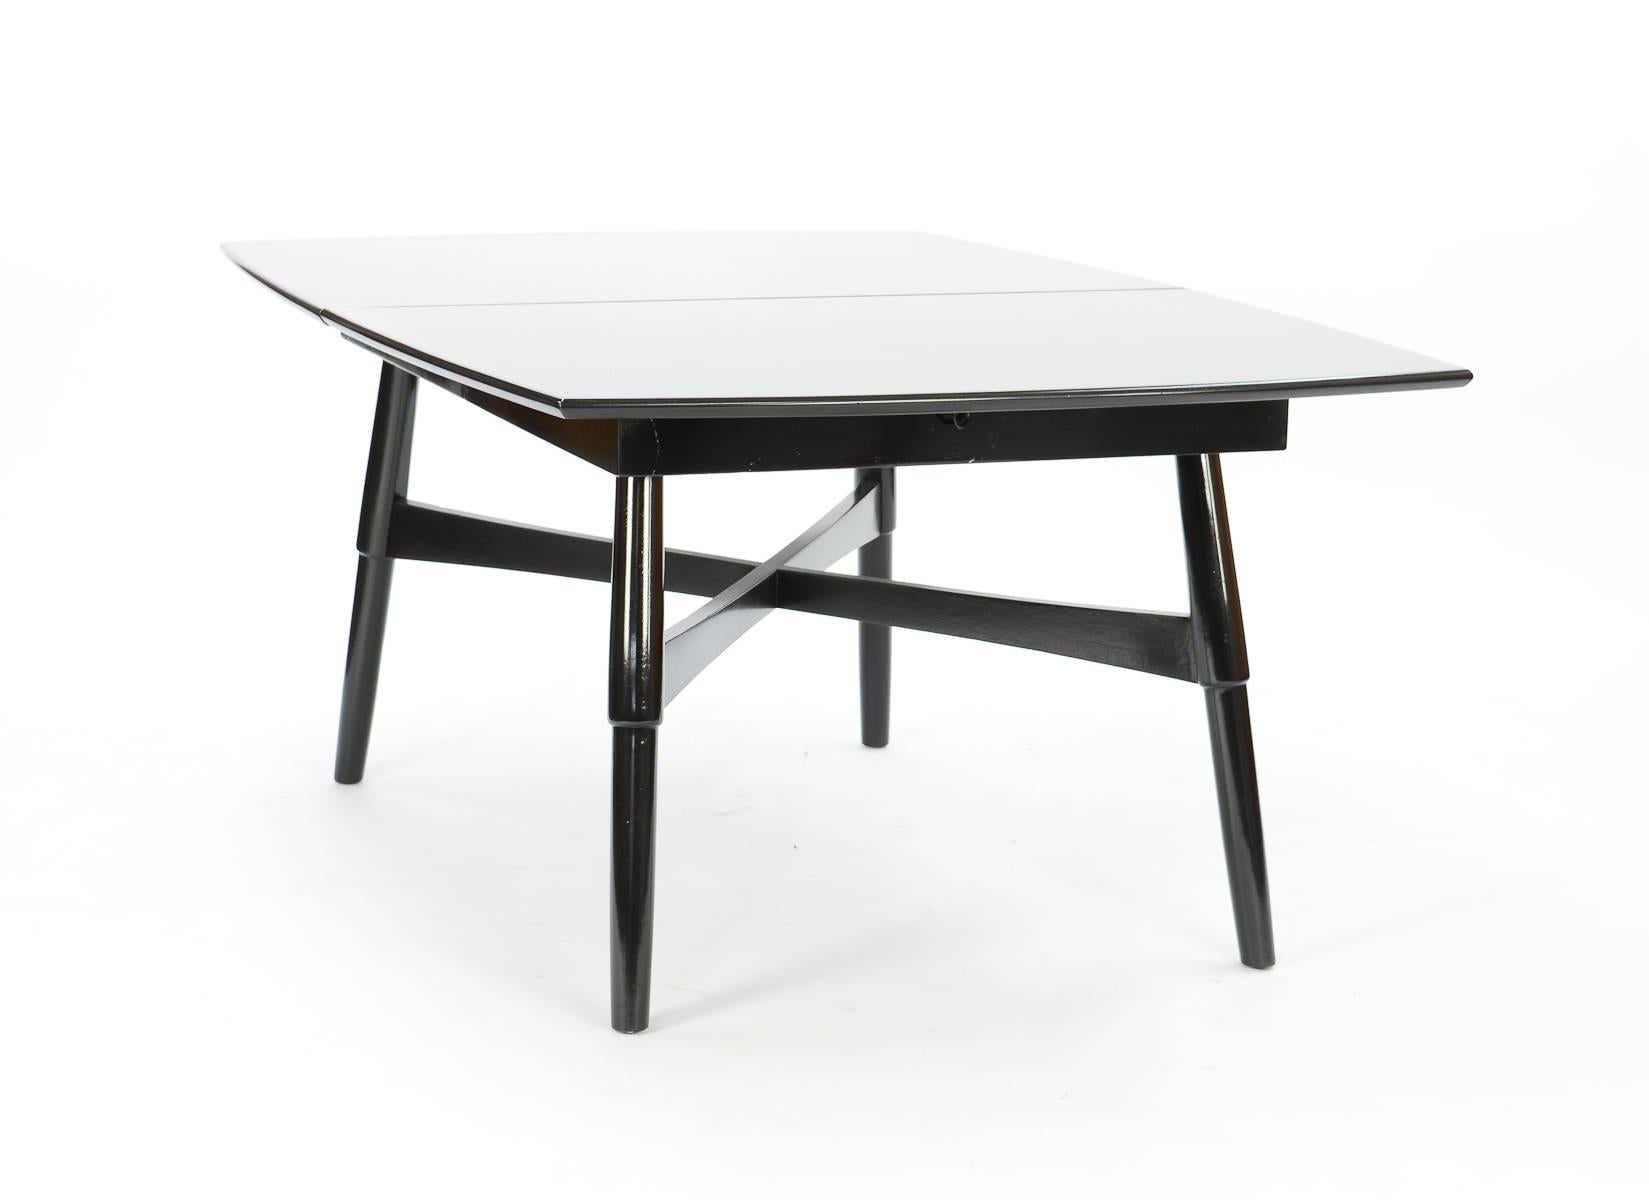 Birch John Keal Ebonized Model 4058 Dining Table and Chairs for Brown Saltman